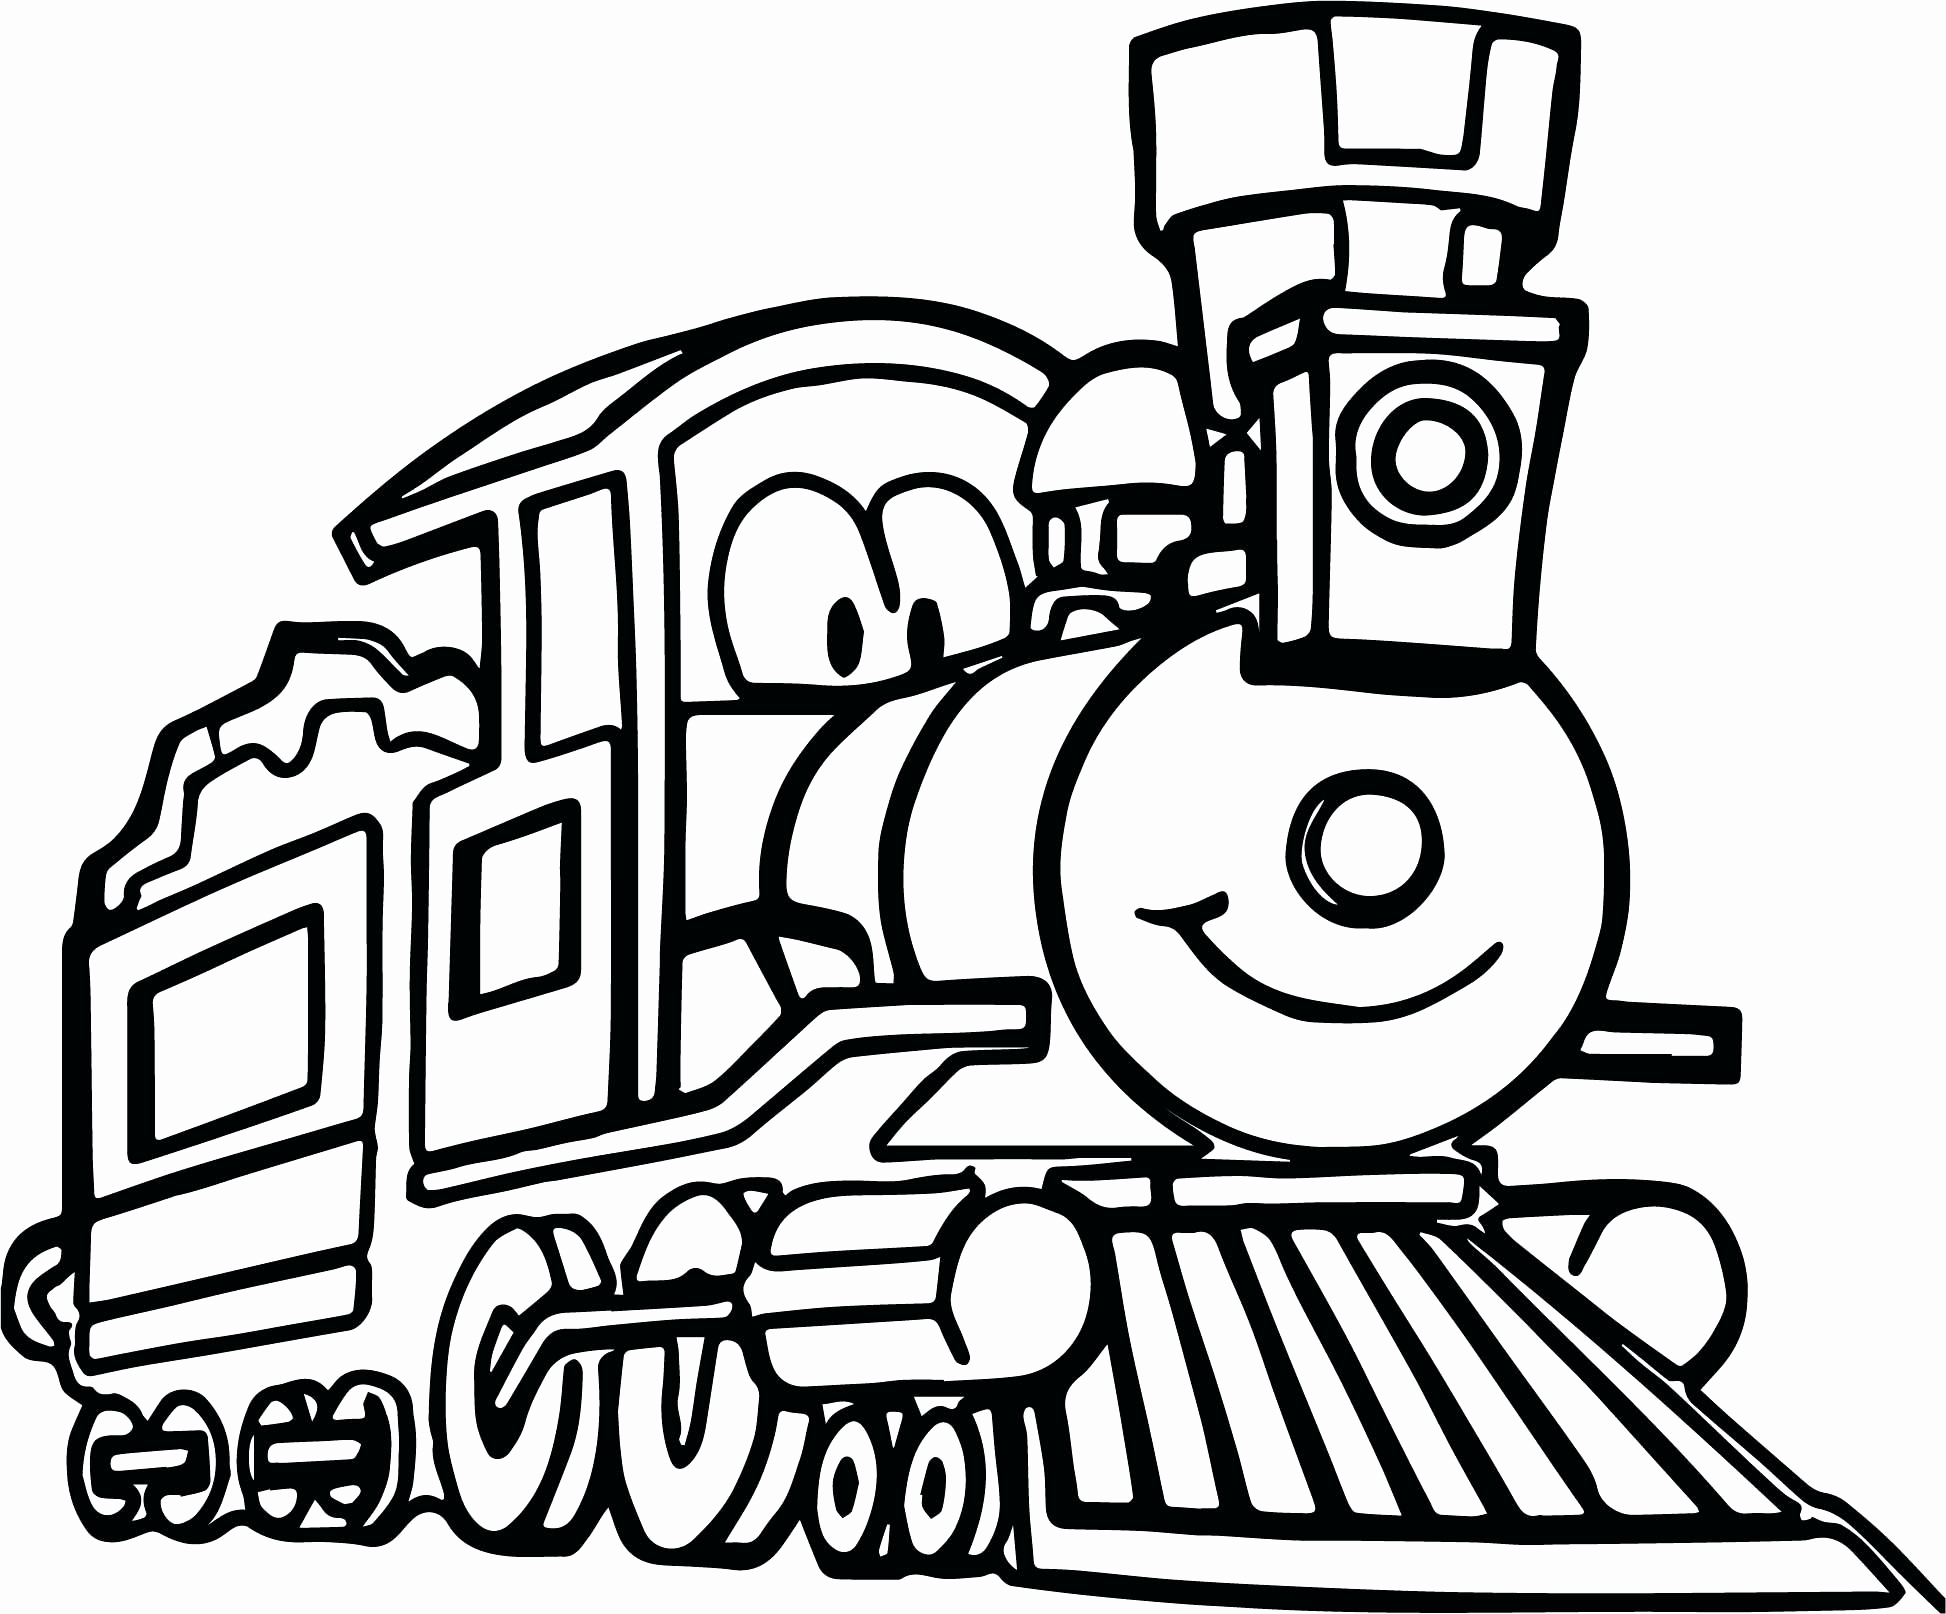 Cartoon Train Coloring Pages at GetColorings.com | Free ...